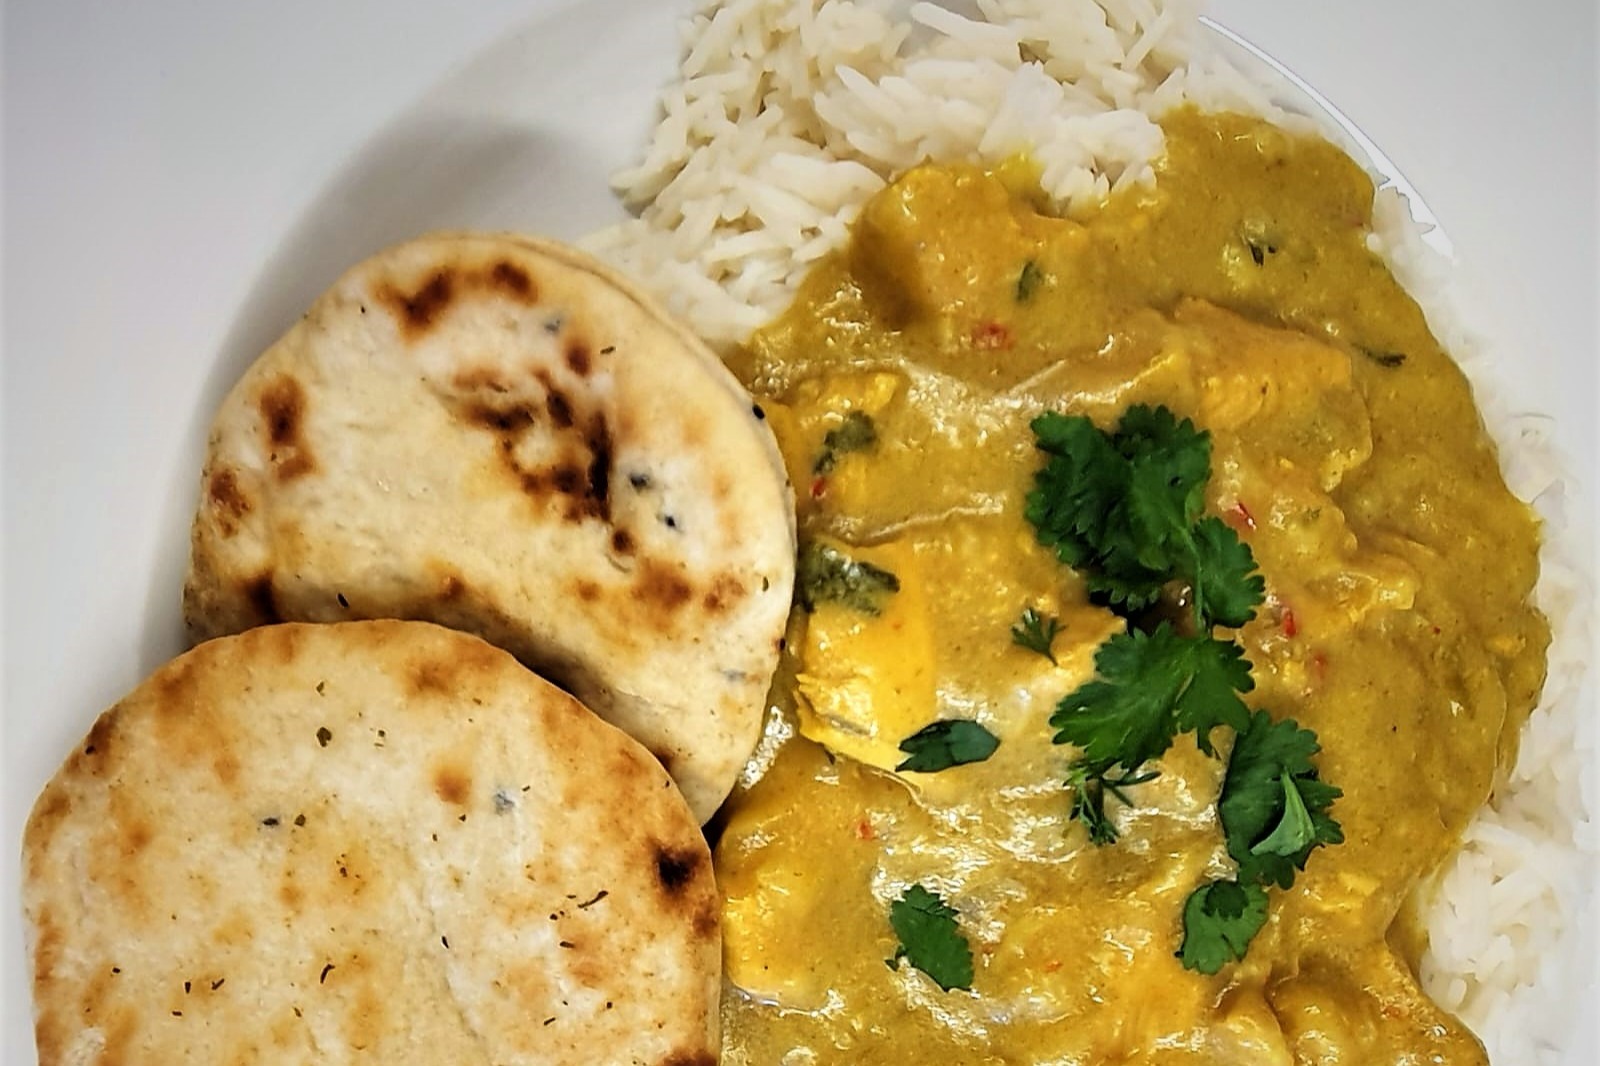 Garlic and corriandar chicken curry served with rice and nan breads.